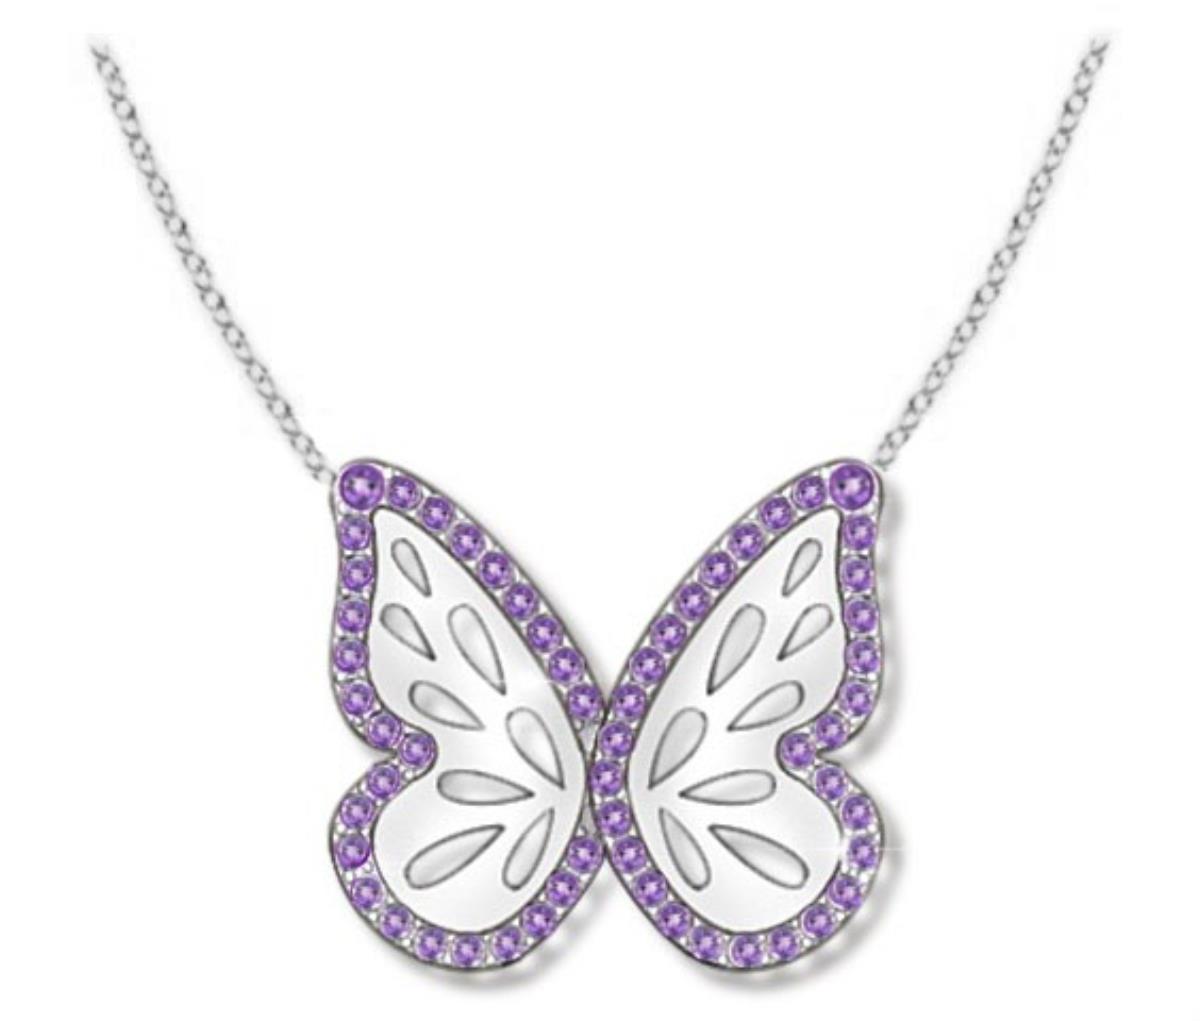 14K White Gold Amethyst Butterfly 18" Necklace